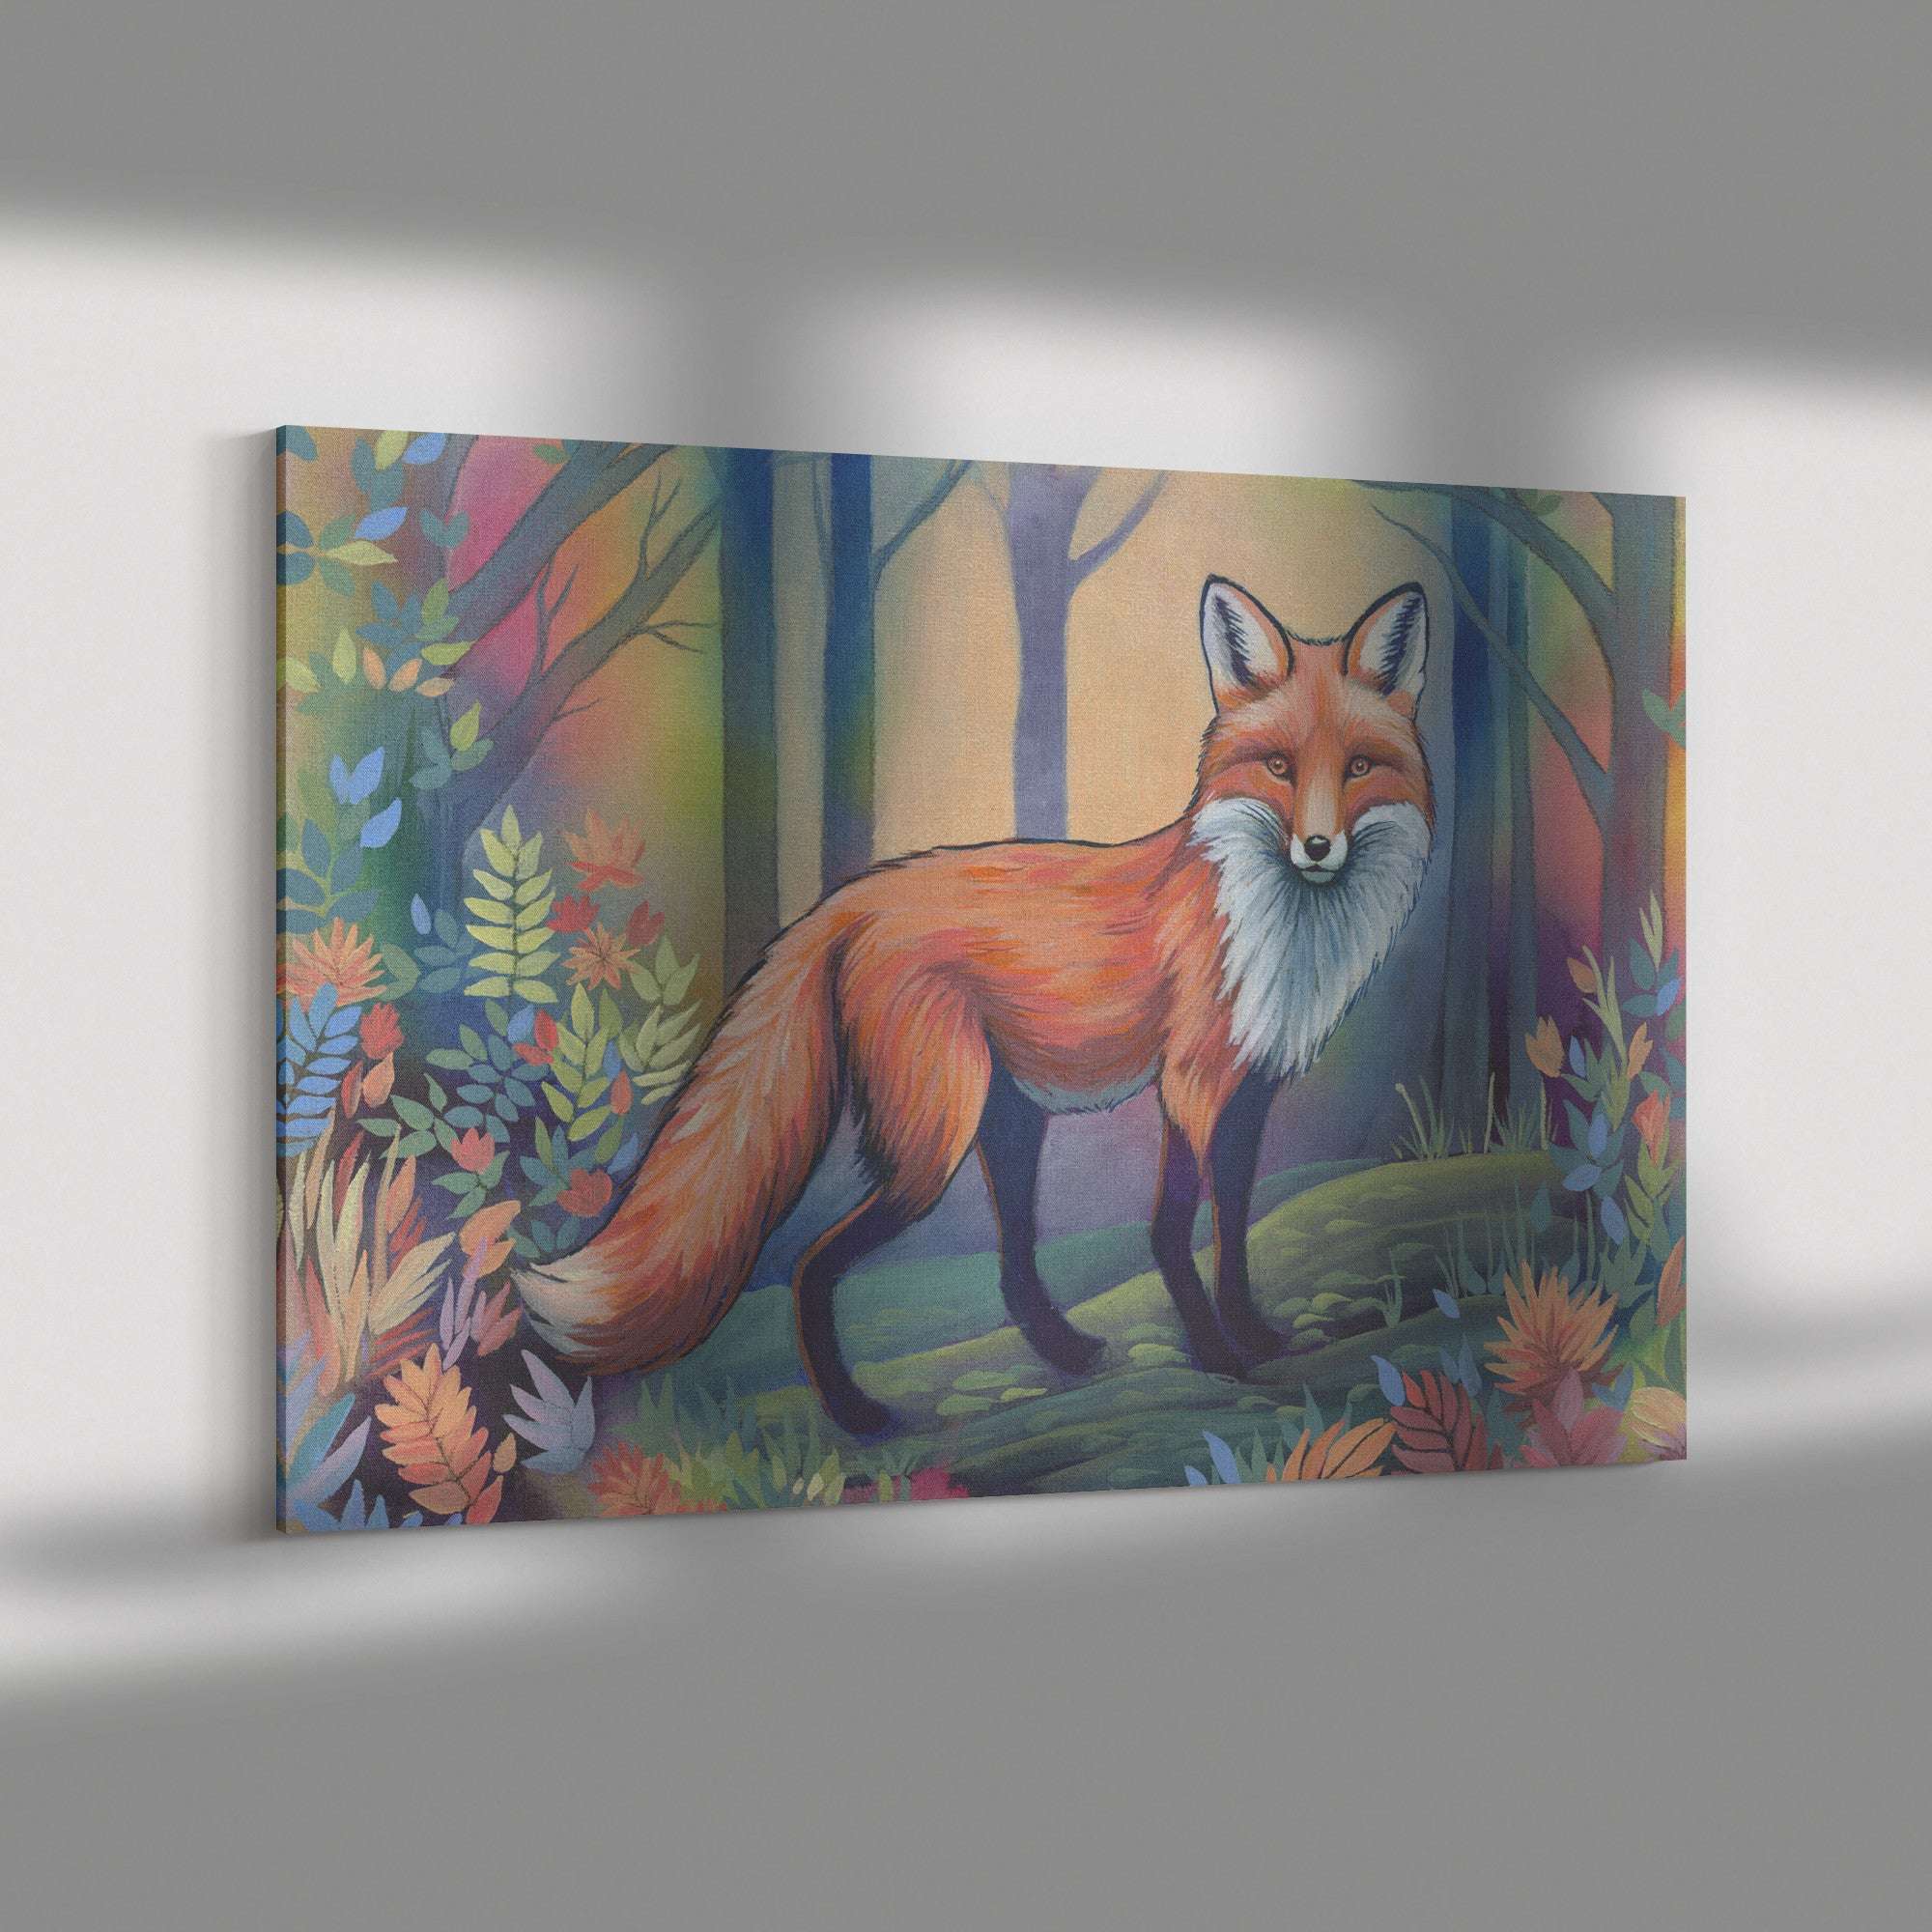 Colorful Canvas Art Print of a fox standing in a vibrant forest, displayed on a gray wall.